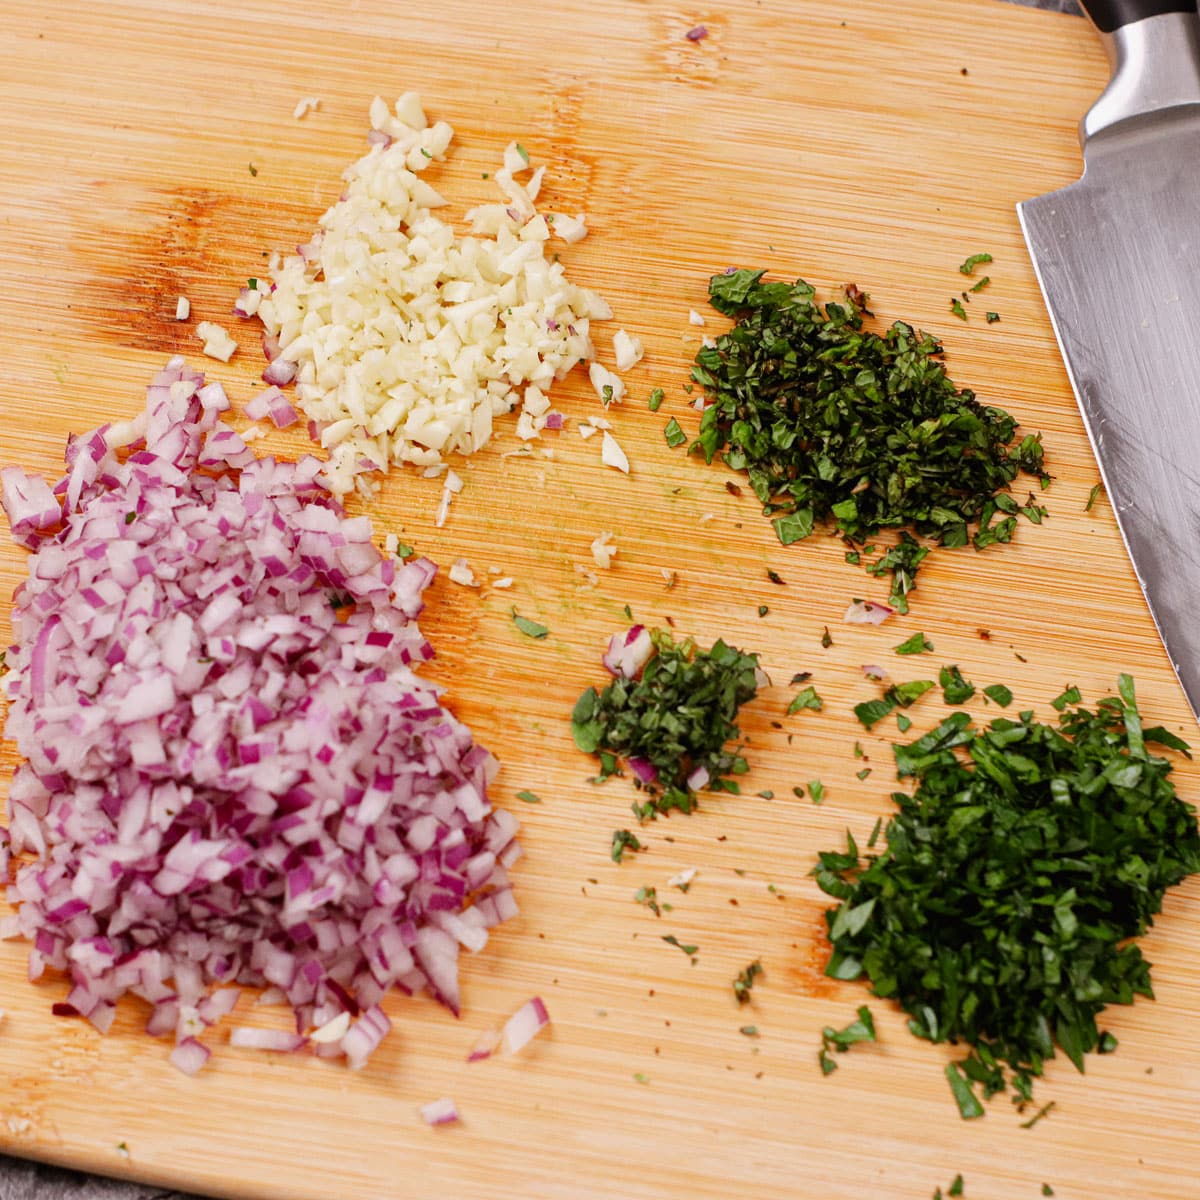 Chopped herbs and spices: onion, garlic, parsley, mint, oregano